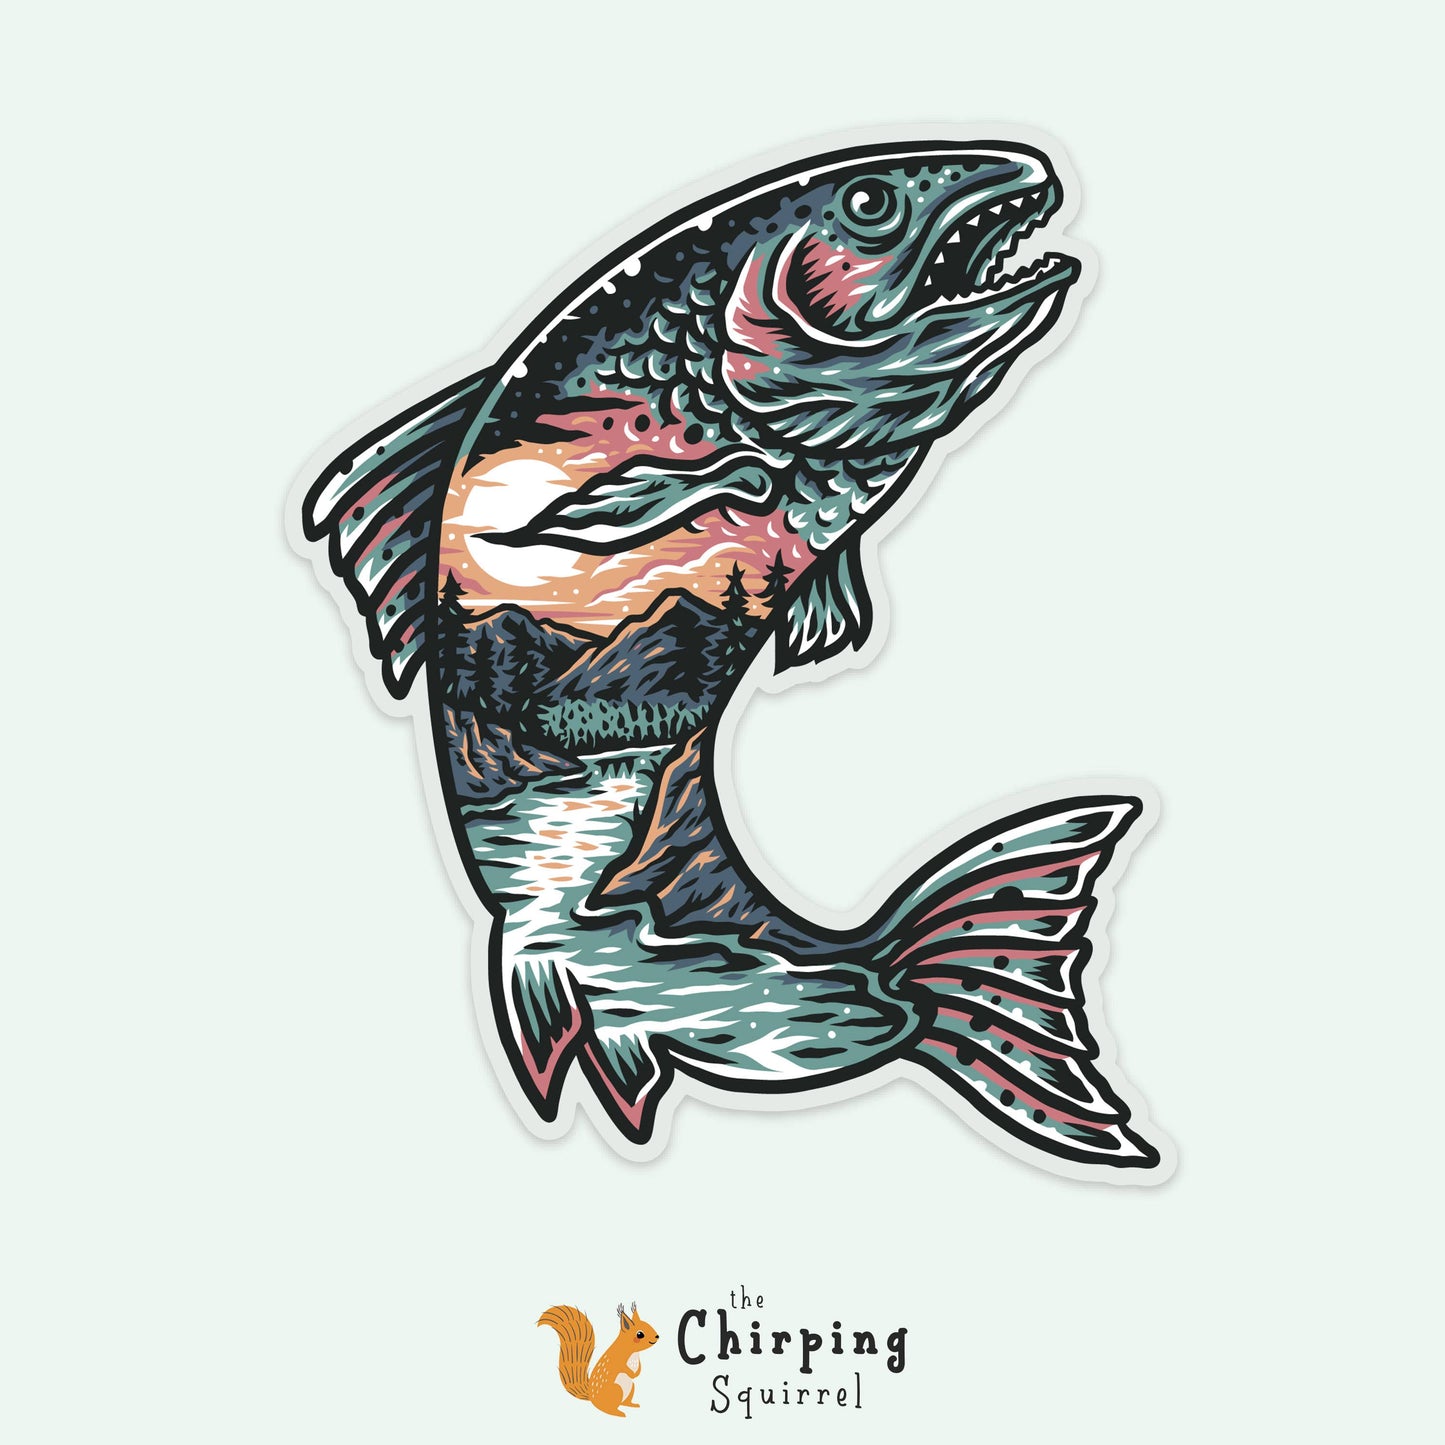 The Chirping Squirrel - Fish / Trout Sticker & Stream View - Fly Fishing / Outdoors